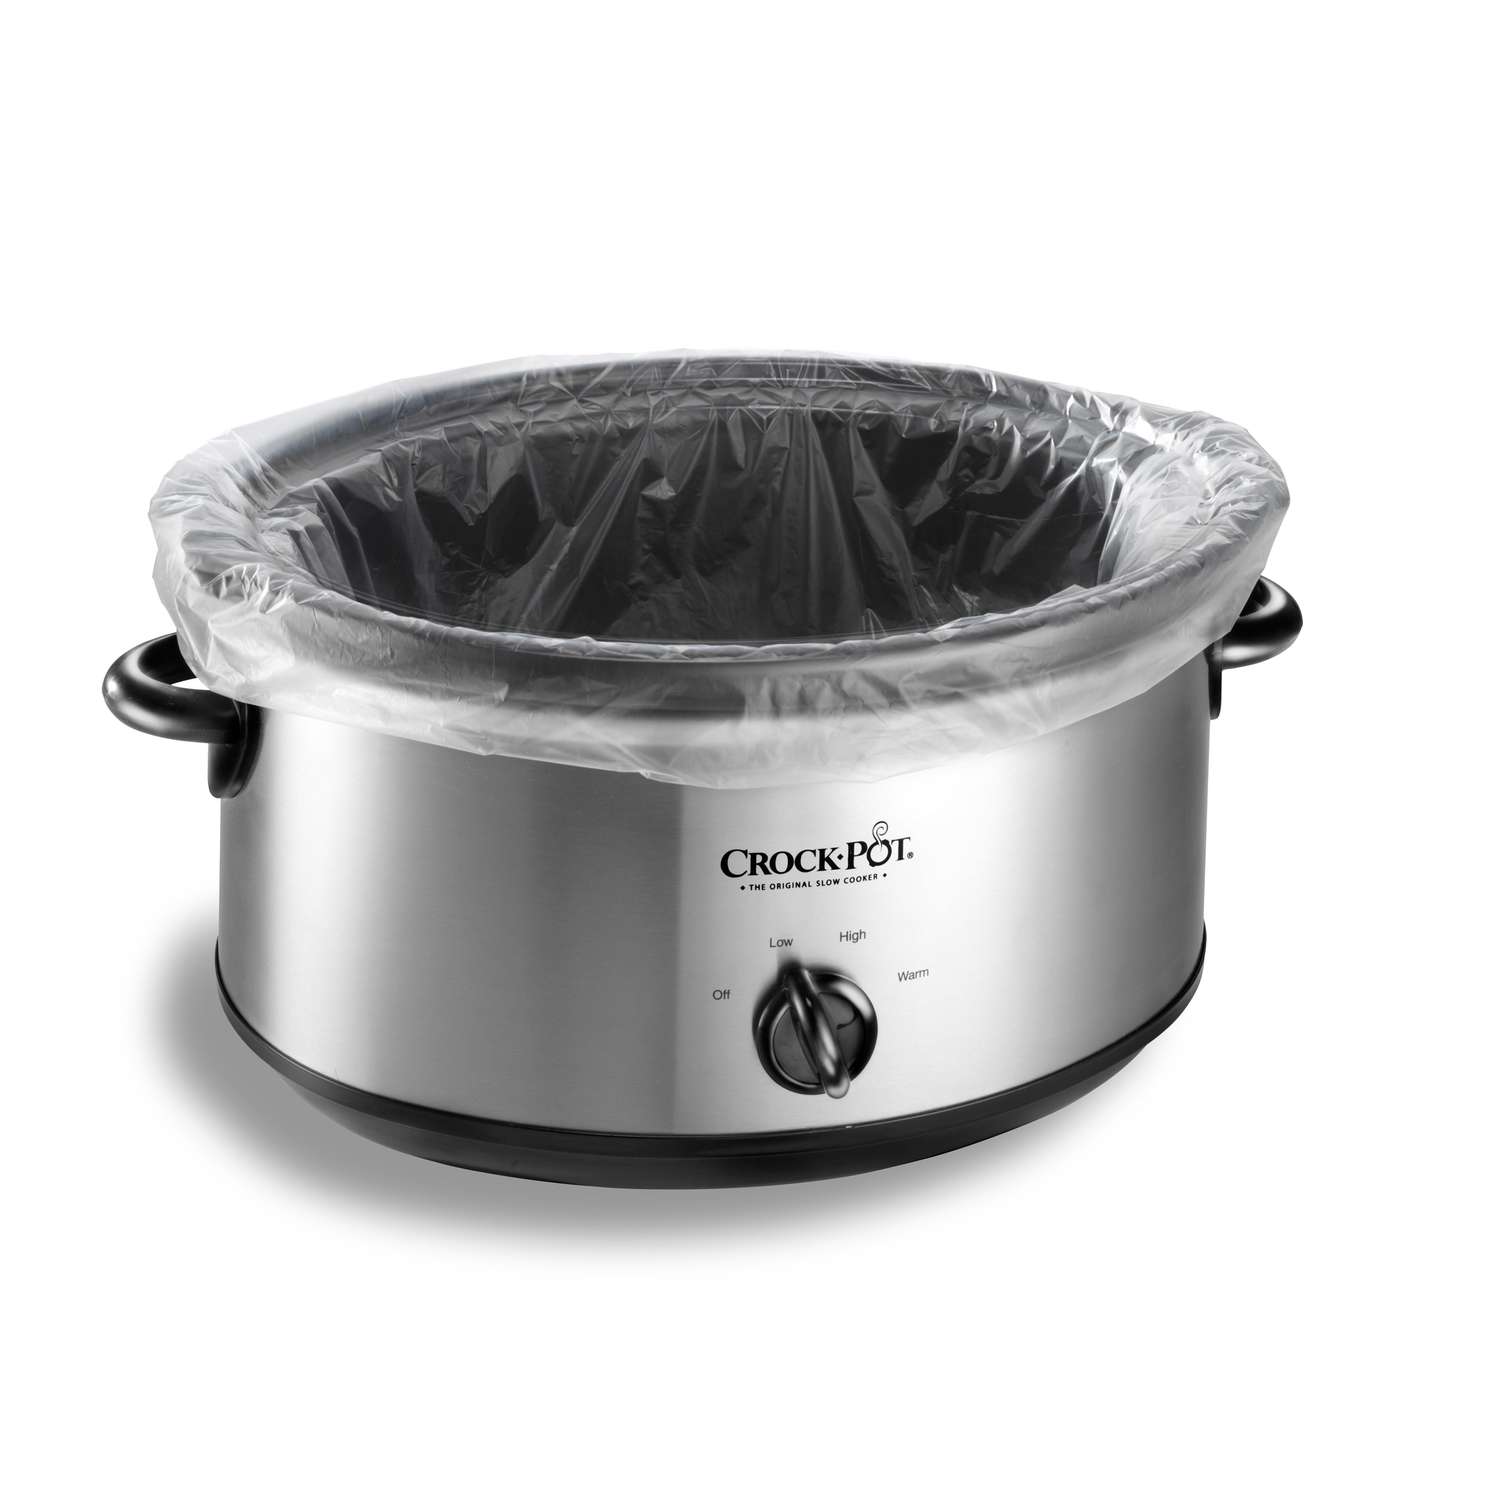 Slow Cooker Liners fit Crock Pot 7-8 QT,Maywe Tanso for Crock Pot Liners For